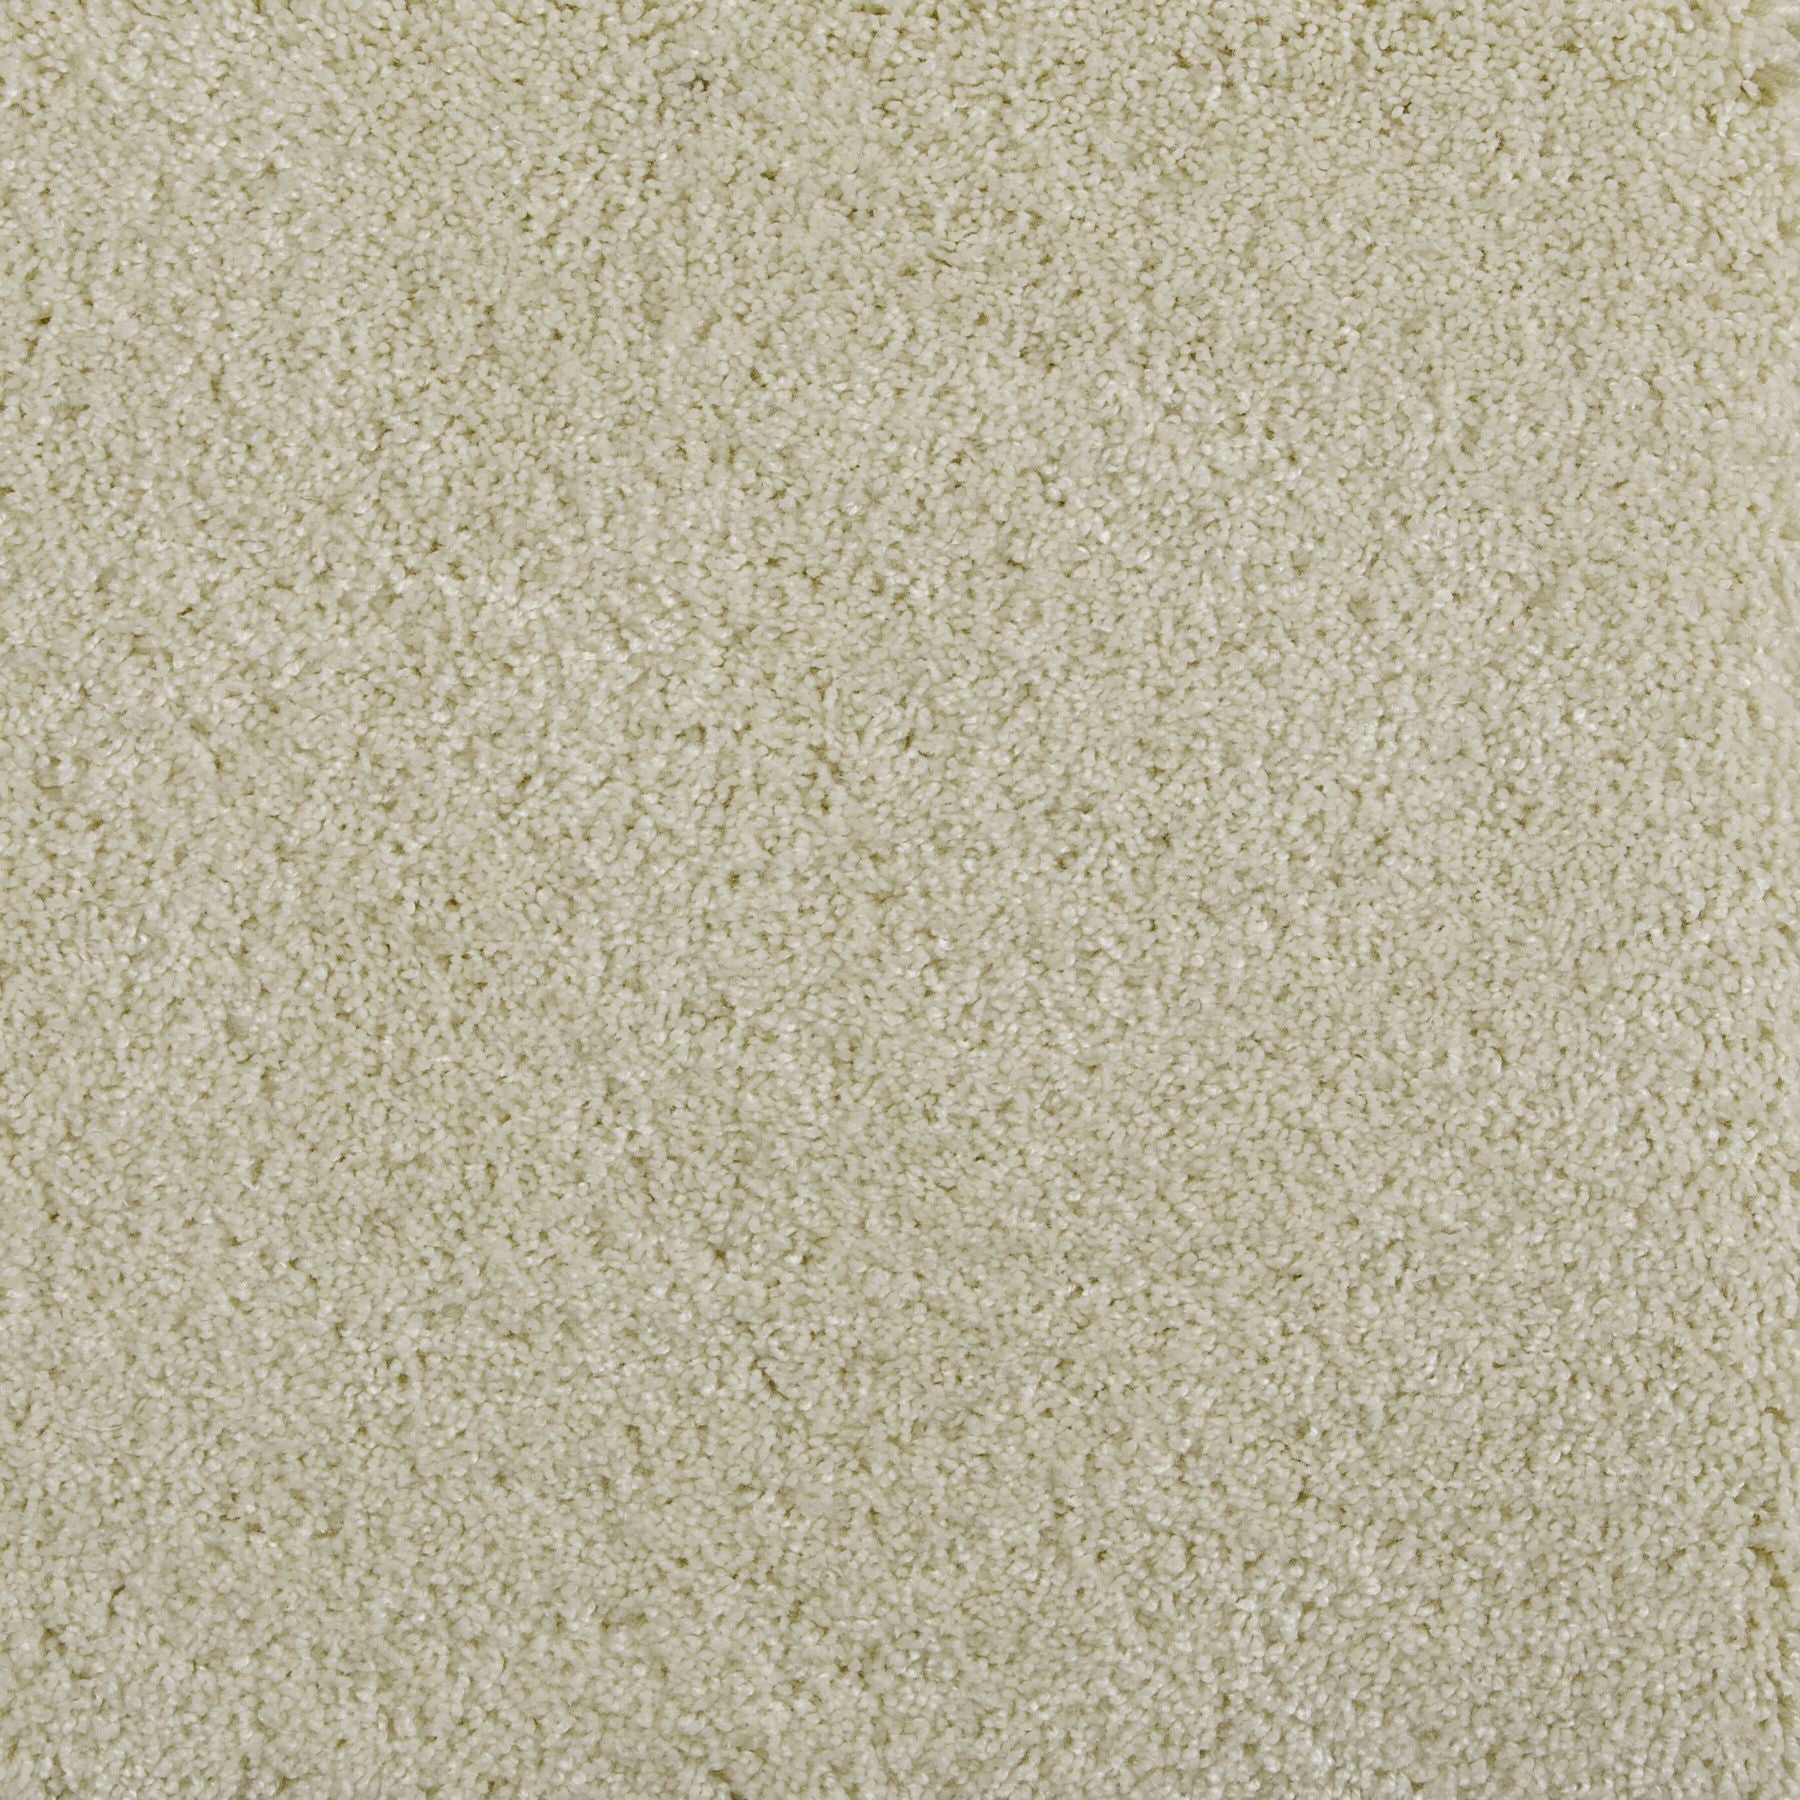 Synthetic broadloom carpet swatch in a cut pile texture in cream.